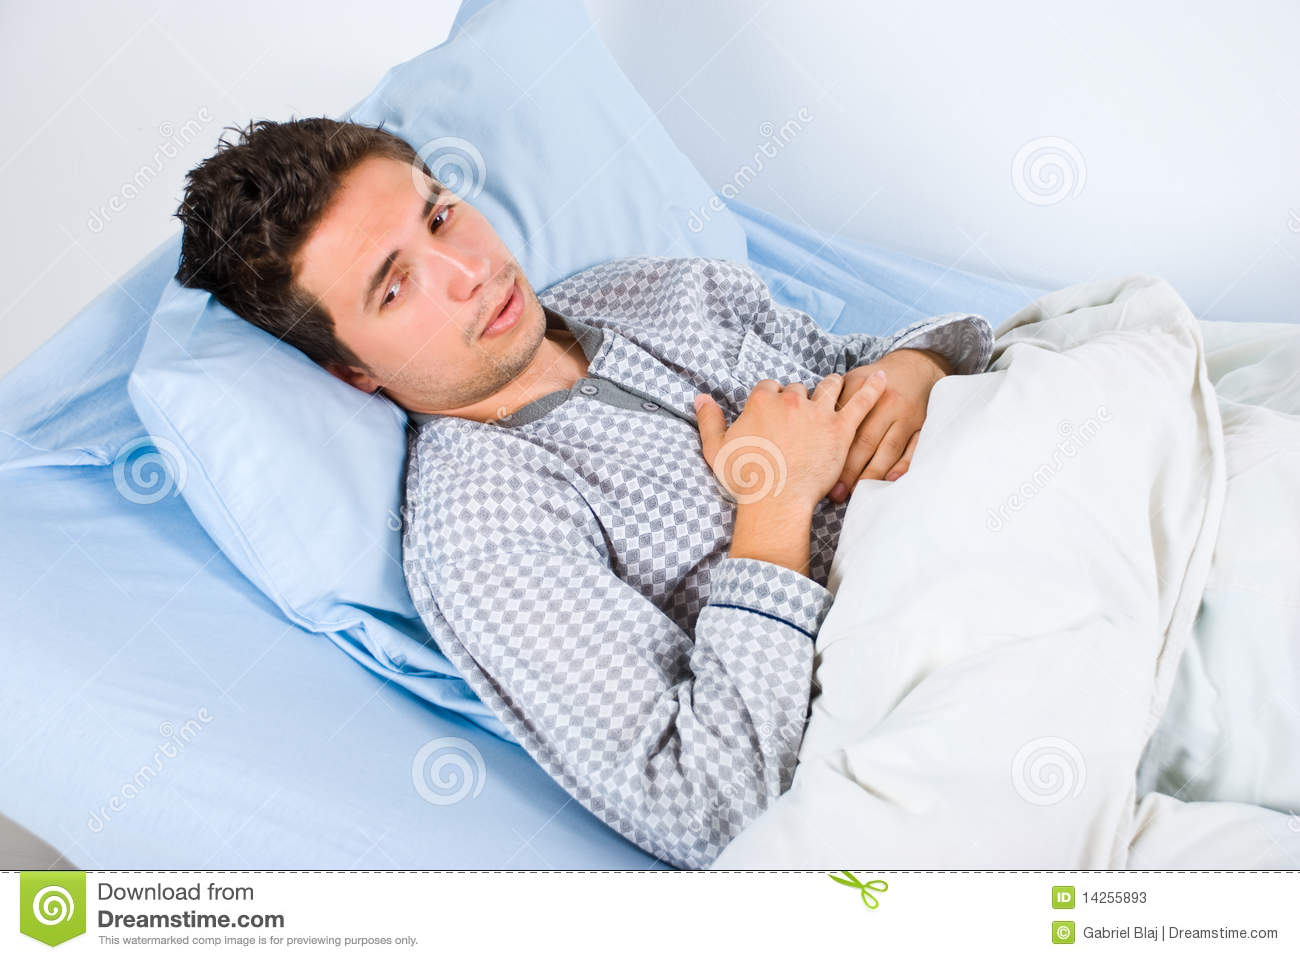 Patient Man In Pain Stock Photos   Image  14255893